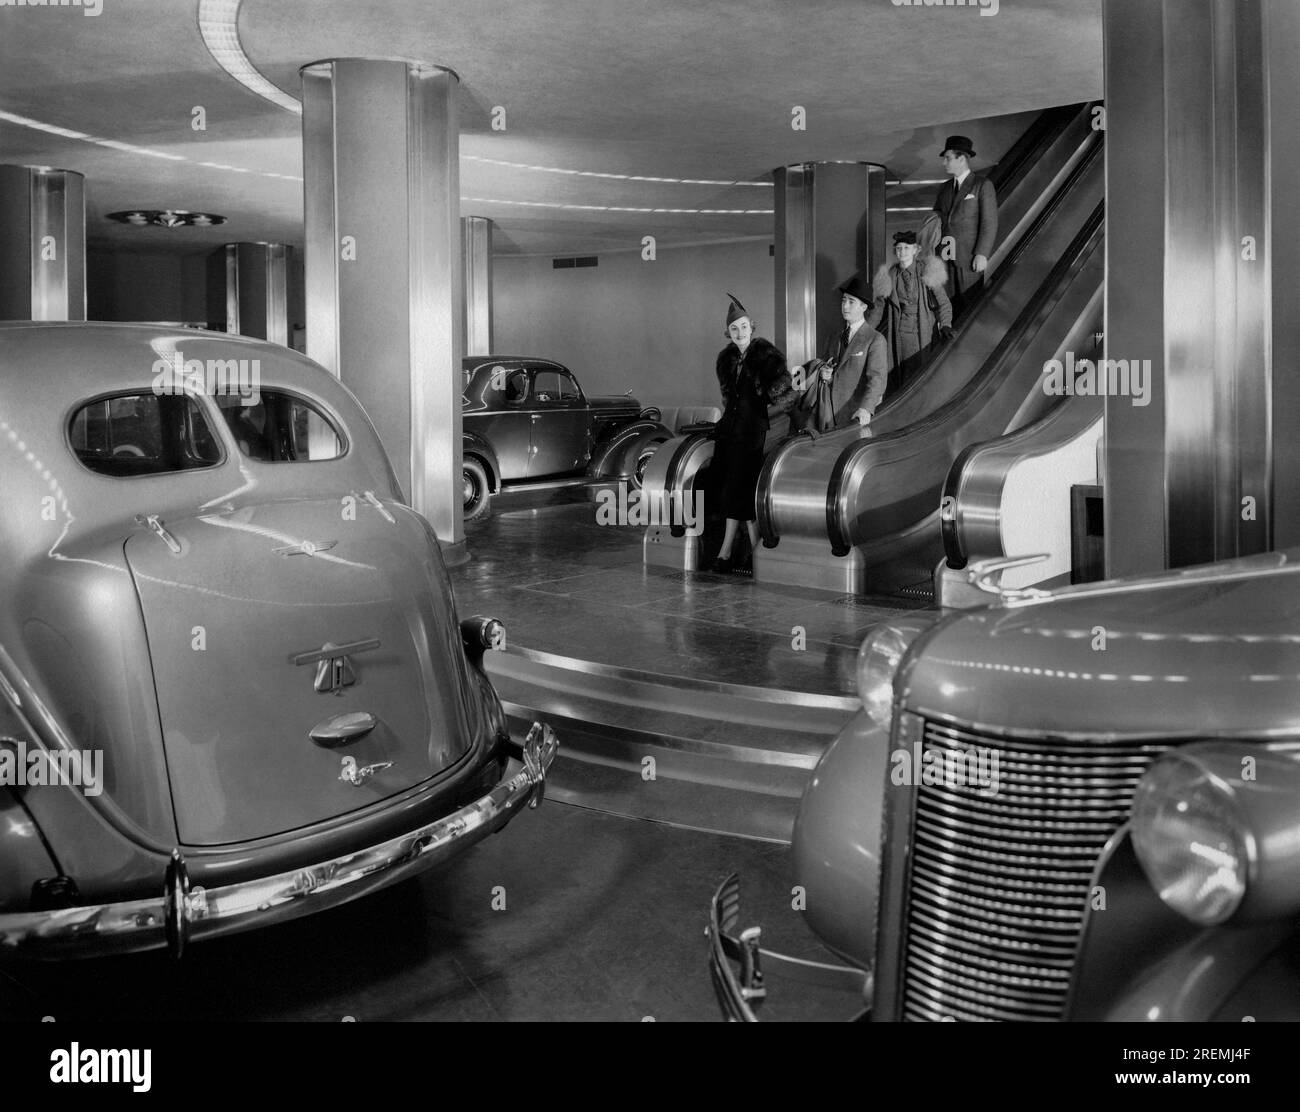 New York, New York:  1936 The Chrysler auto display on the ground floor of the Chrysler Building. The elevators led up to the mezzanine level which housed the Walter Chrysler mini museum. Stock Photo